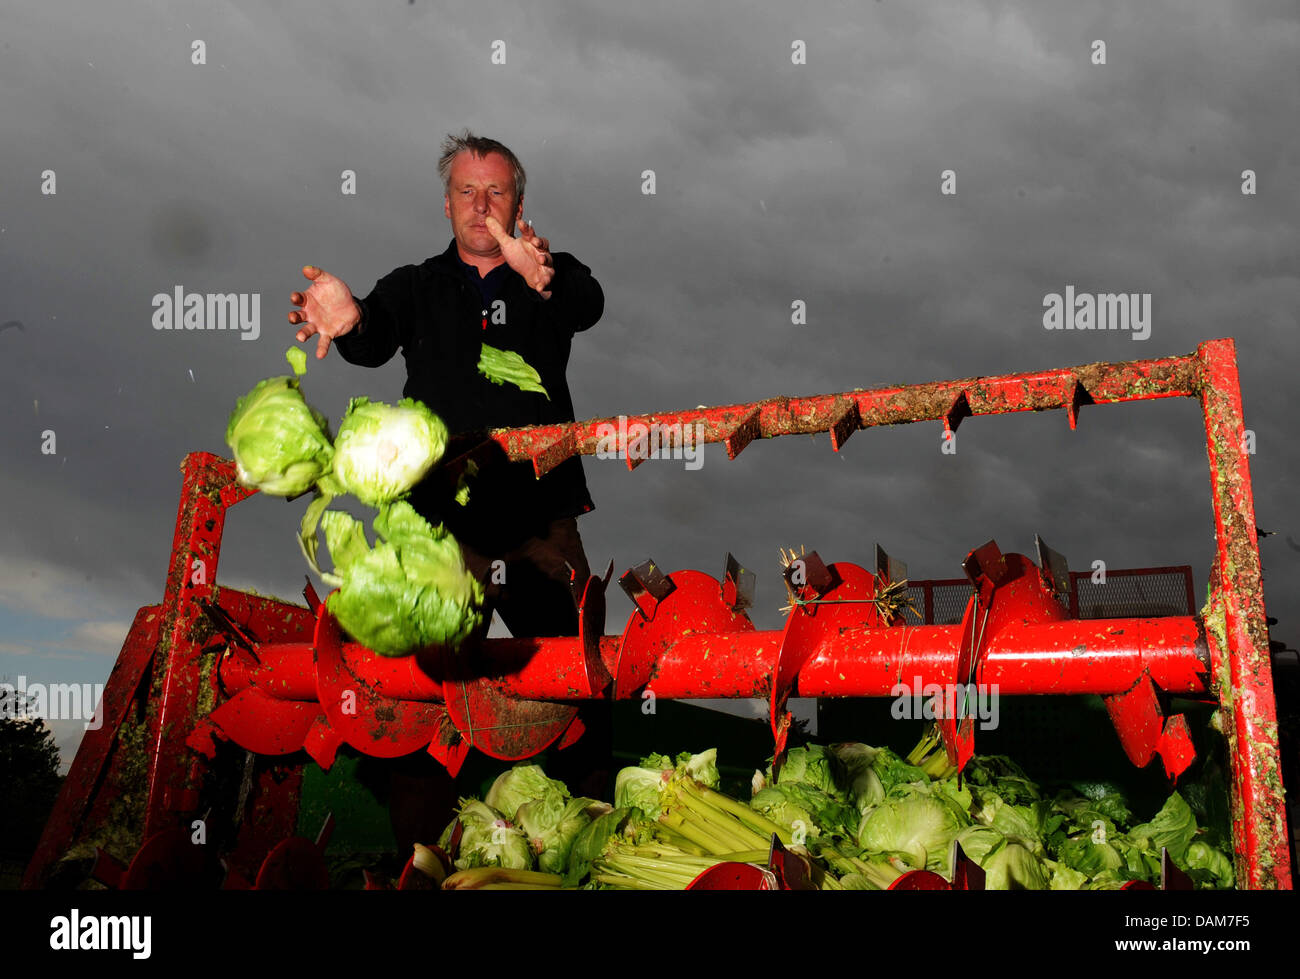 Farmer Hermann Voges disposes salads at a farmyard in Ronneberg, Germany, 27 May 2011. Farmers in the north of Germany shred and throw away tons of salads, tomatos and cucumbers, due to possible infections of EHEC-bacteria. Photo: Julian Stratenschulte Stock Photo